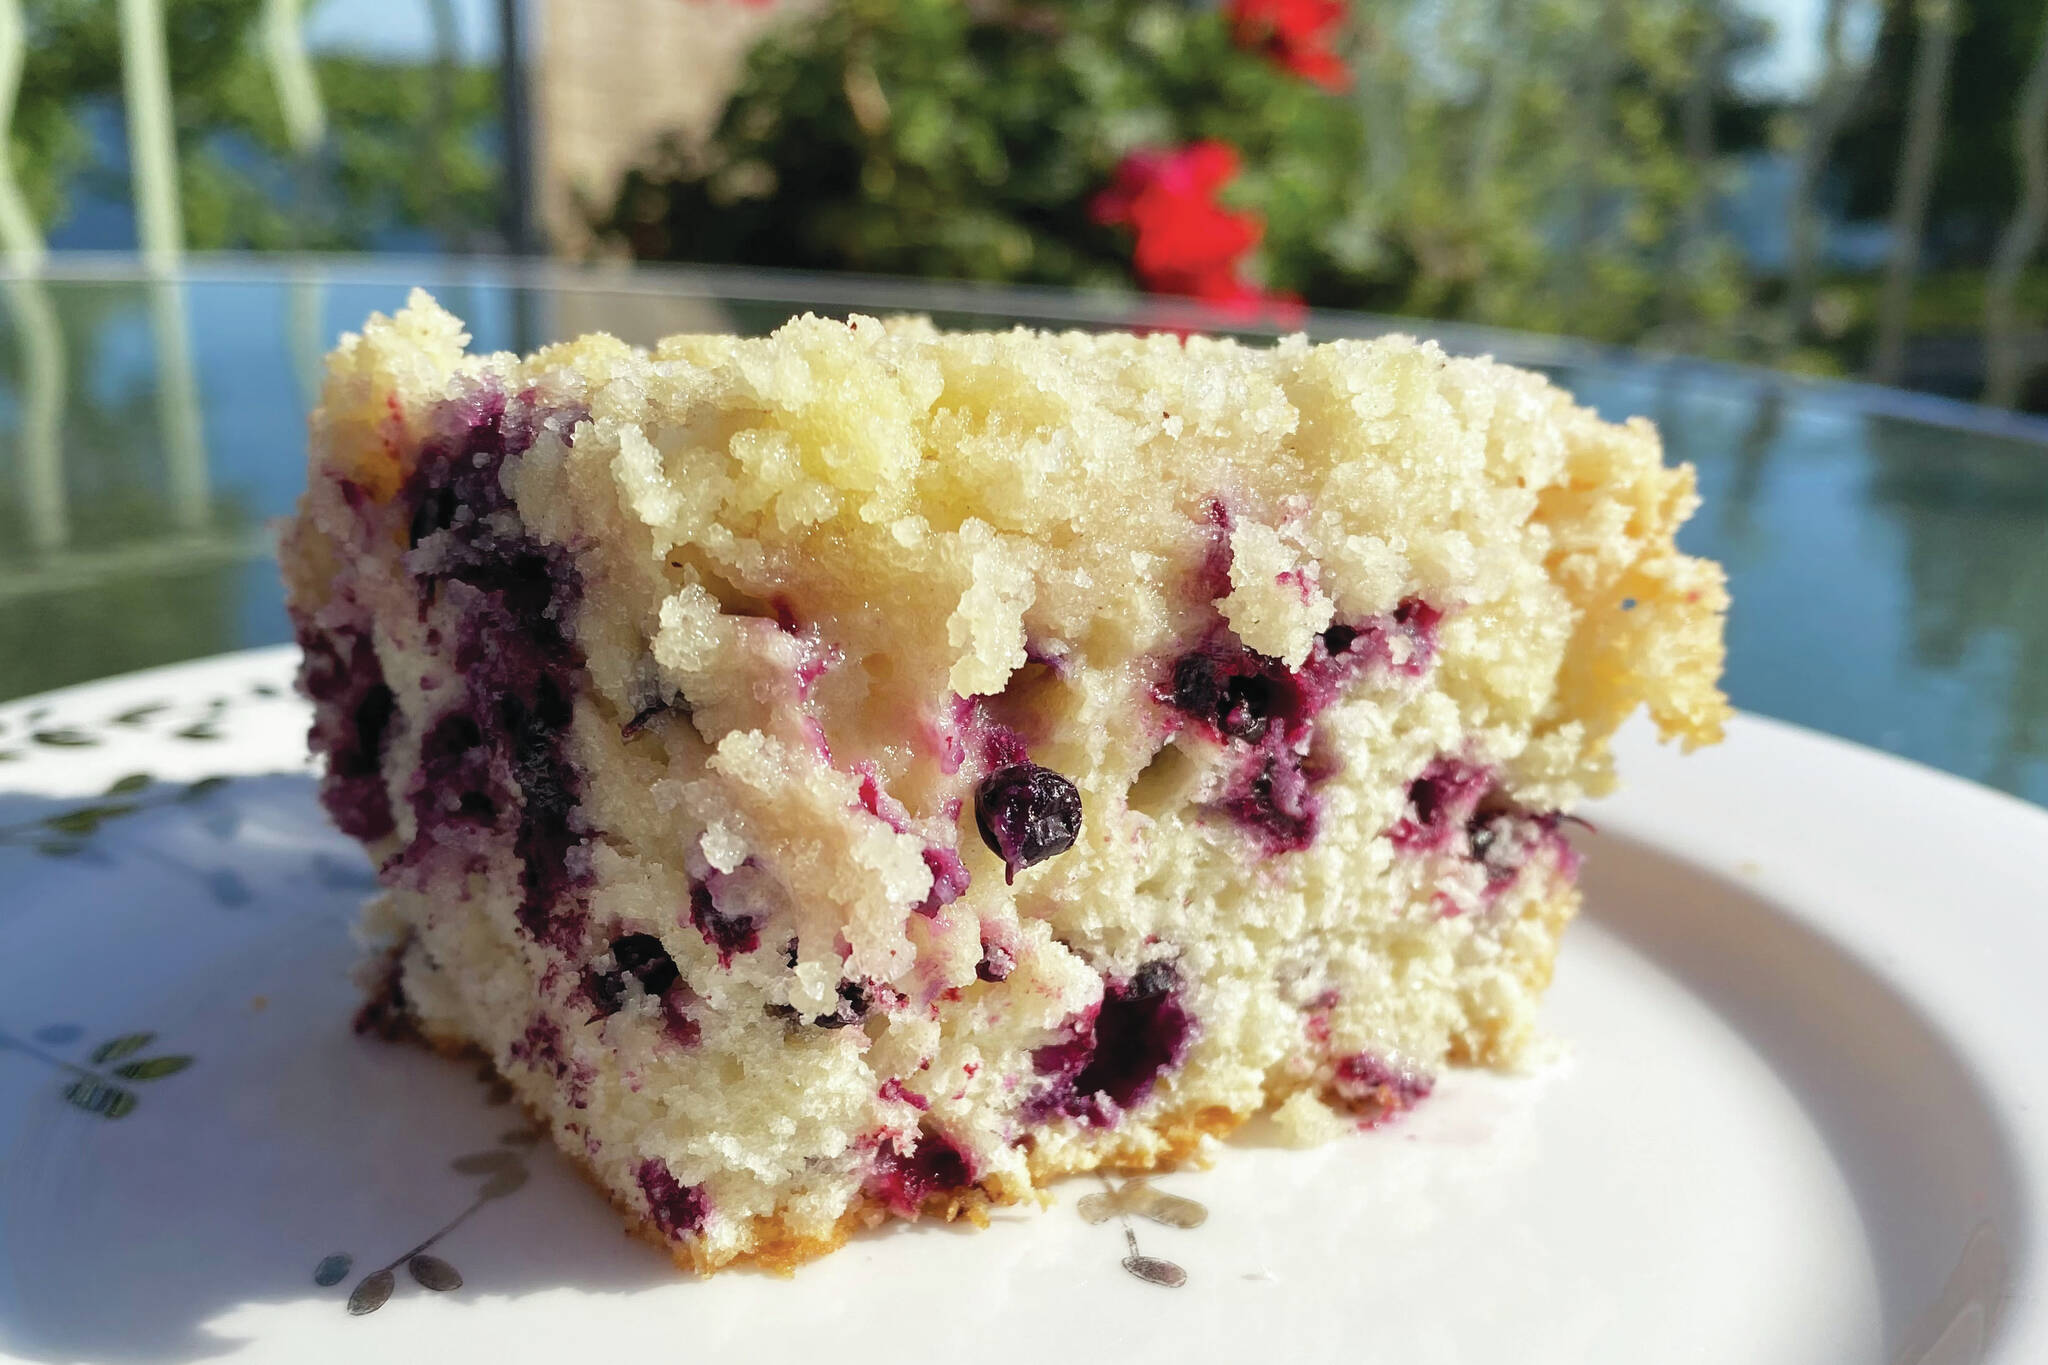 Blueberry buckle conjures warm memories of family. (Photo by Tressa Dale/Peninsula Clarion)